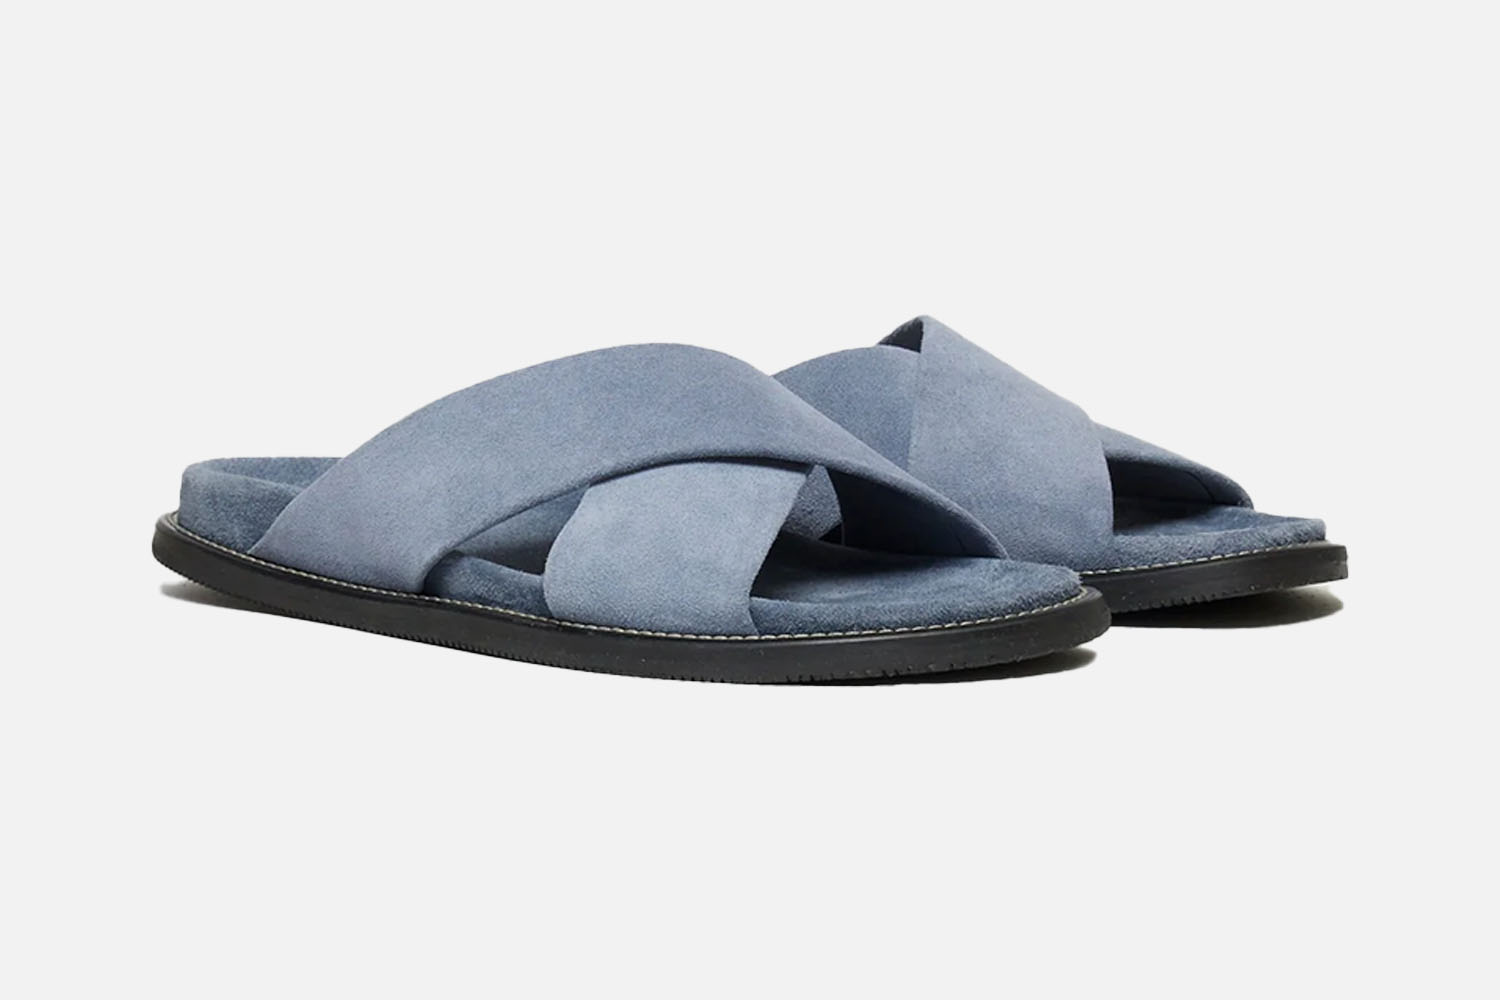 The "Quiet Luxury" Sandals: Todd Snyder Nomad Suede Crossover Sandal